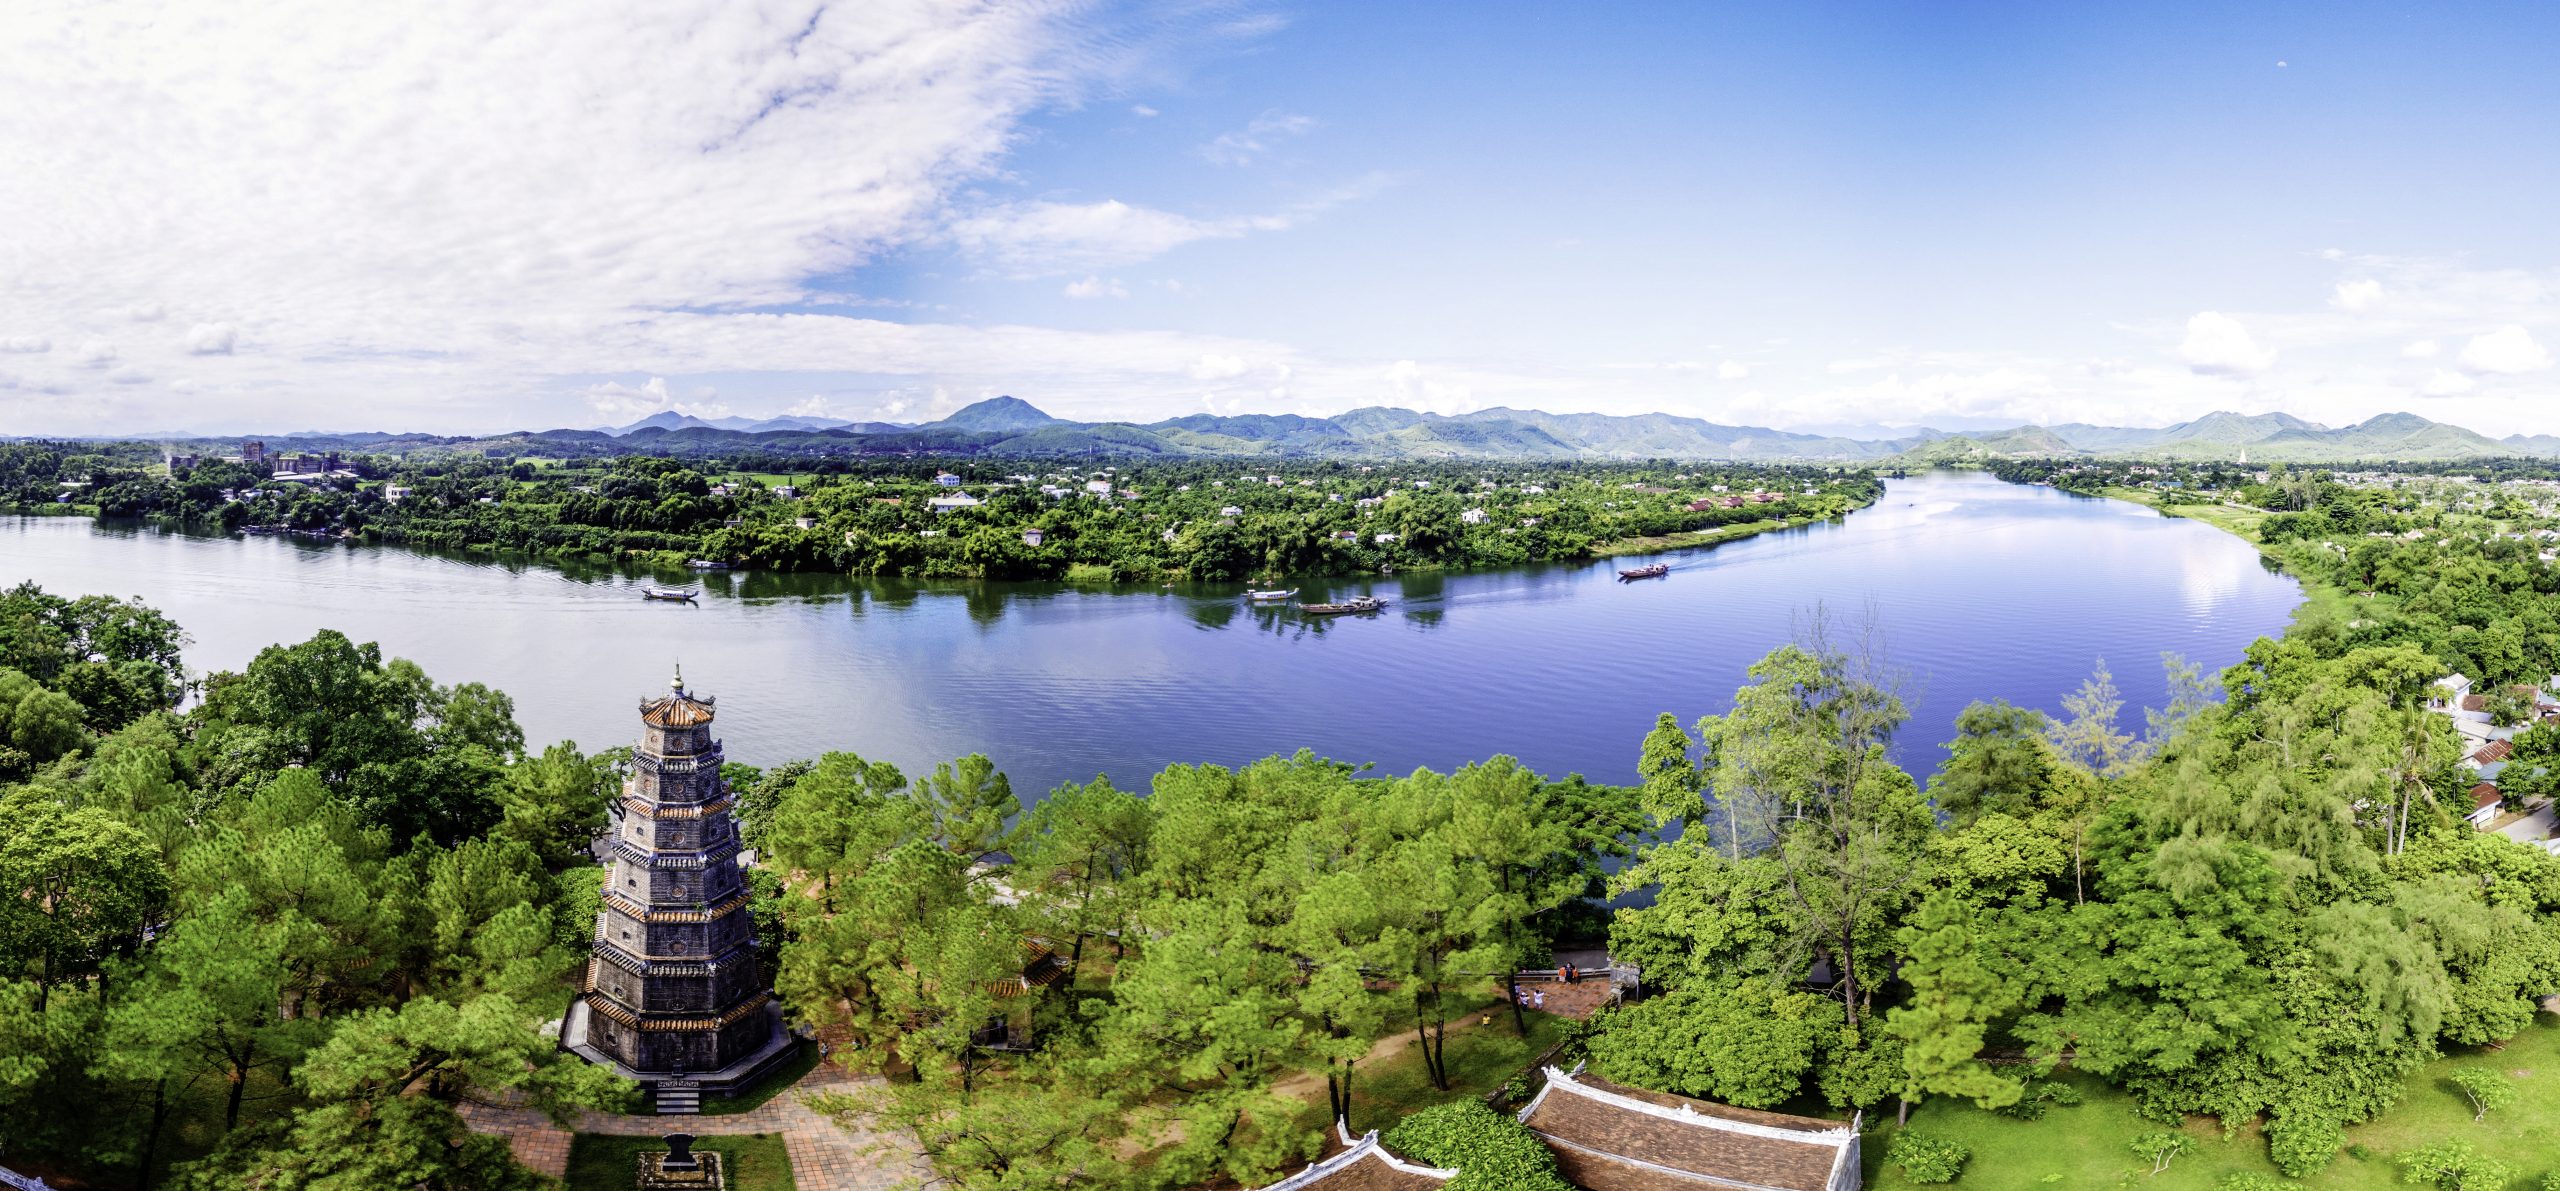 Landscape of Vietnam with waterway and pagoda